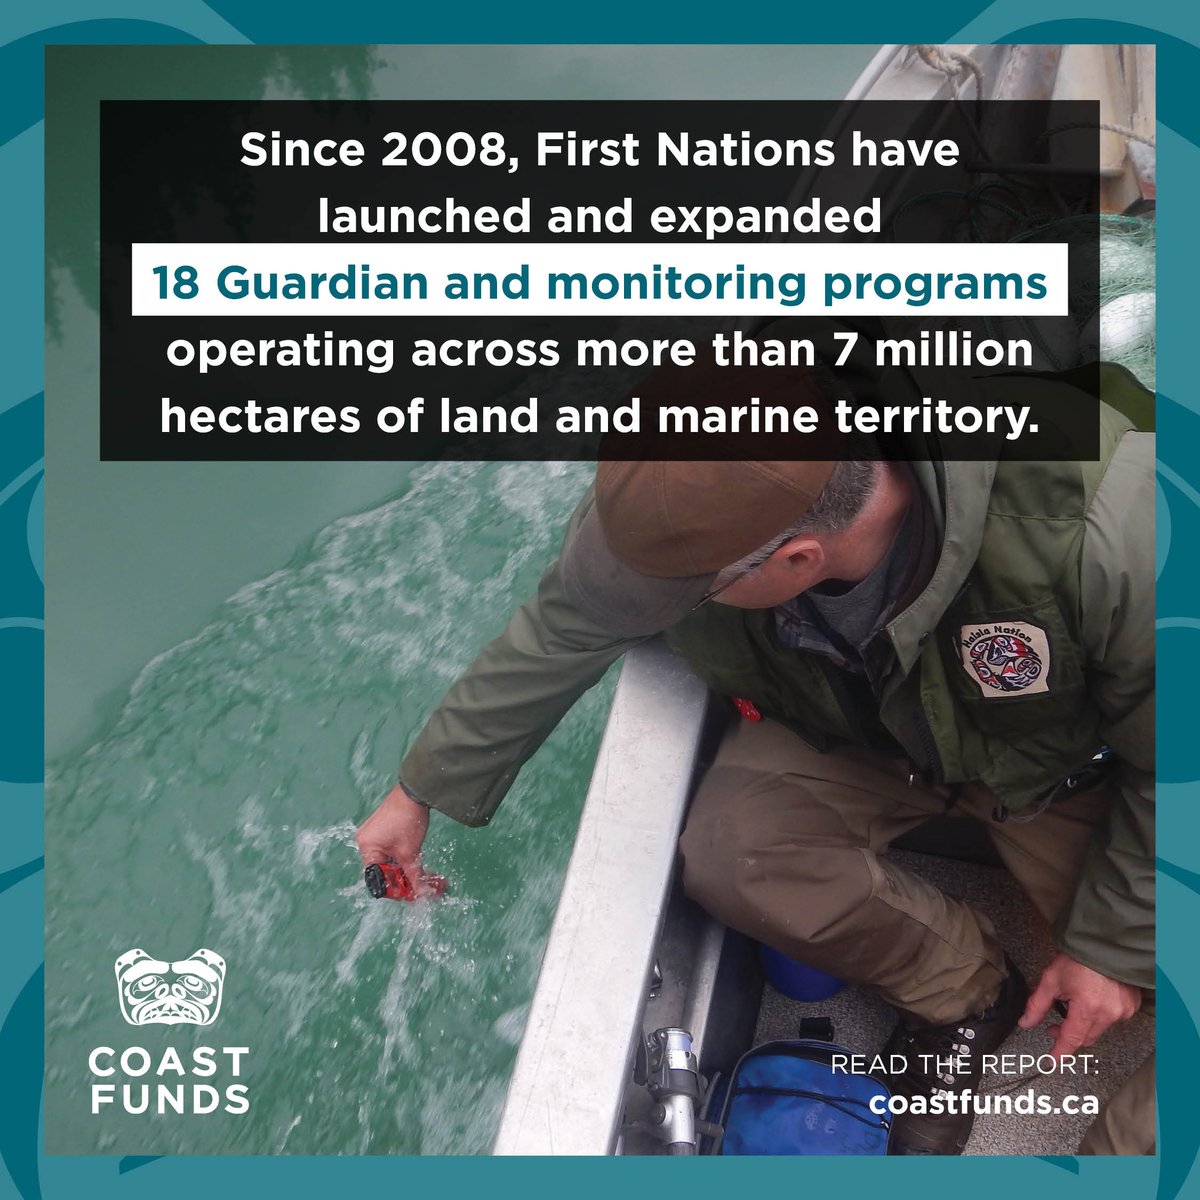 Since 2008, First Nations have met the demands for stewardship by establishing:

✅ 18 #GuardianWatchmen programs, which operate across more than…

✅ 7 million hectares of land and water — that’s about double the size of #VancouverIsland.

3/5